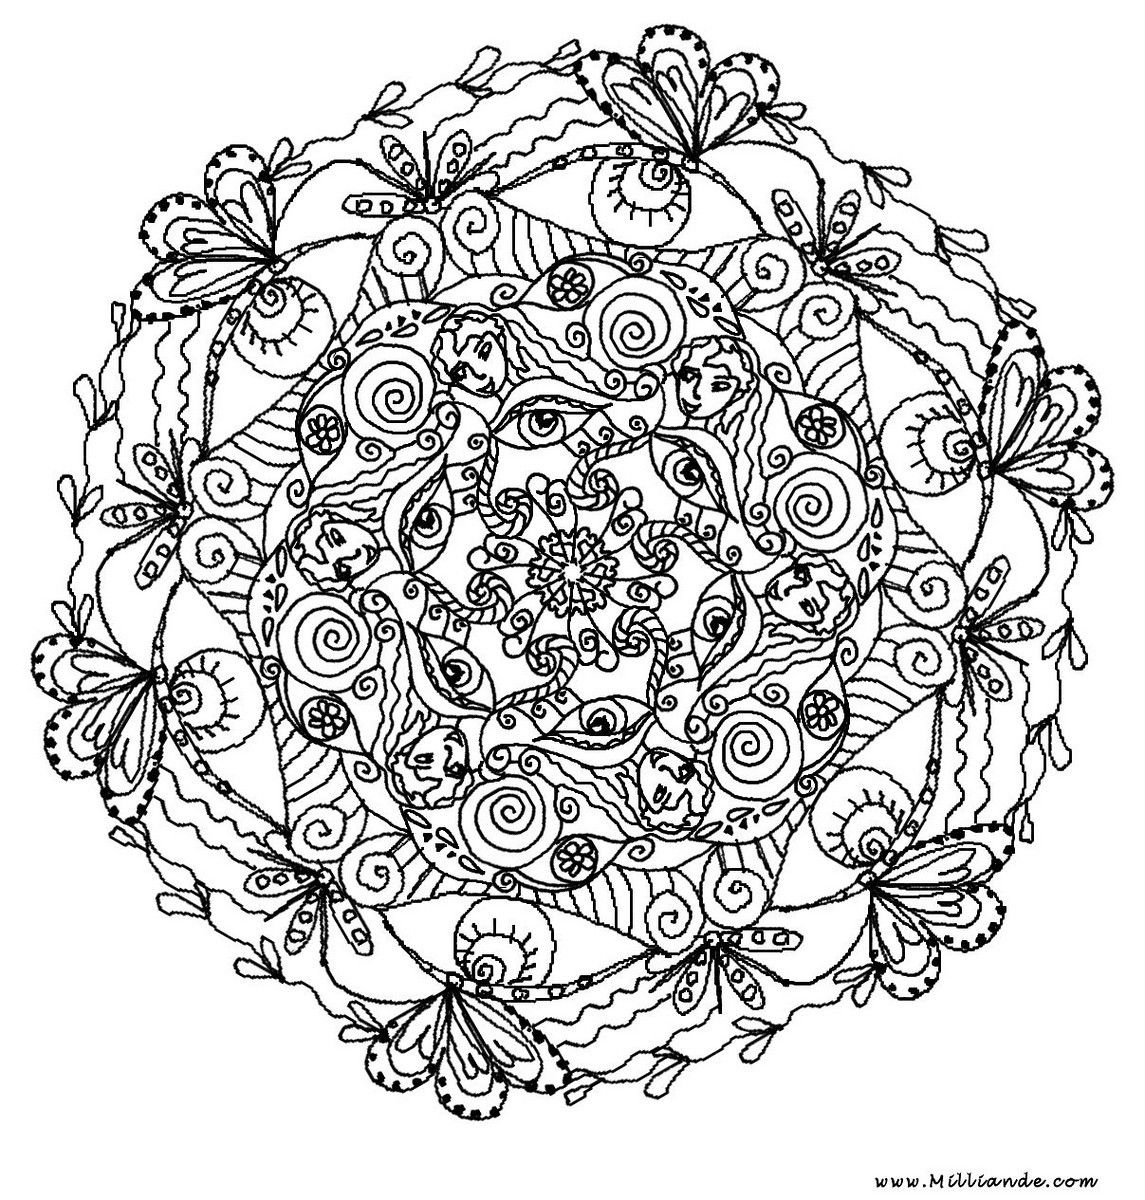 Printable Mandala Coloring Pages Adults Tagged With Advanced Mandala - Free Printable Mandala Coloring Pages For Adults